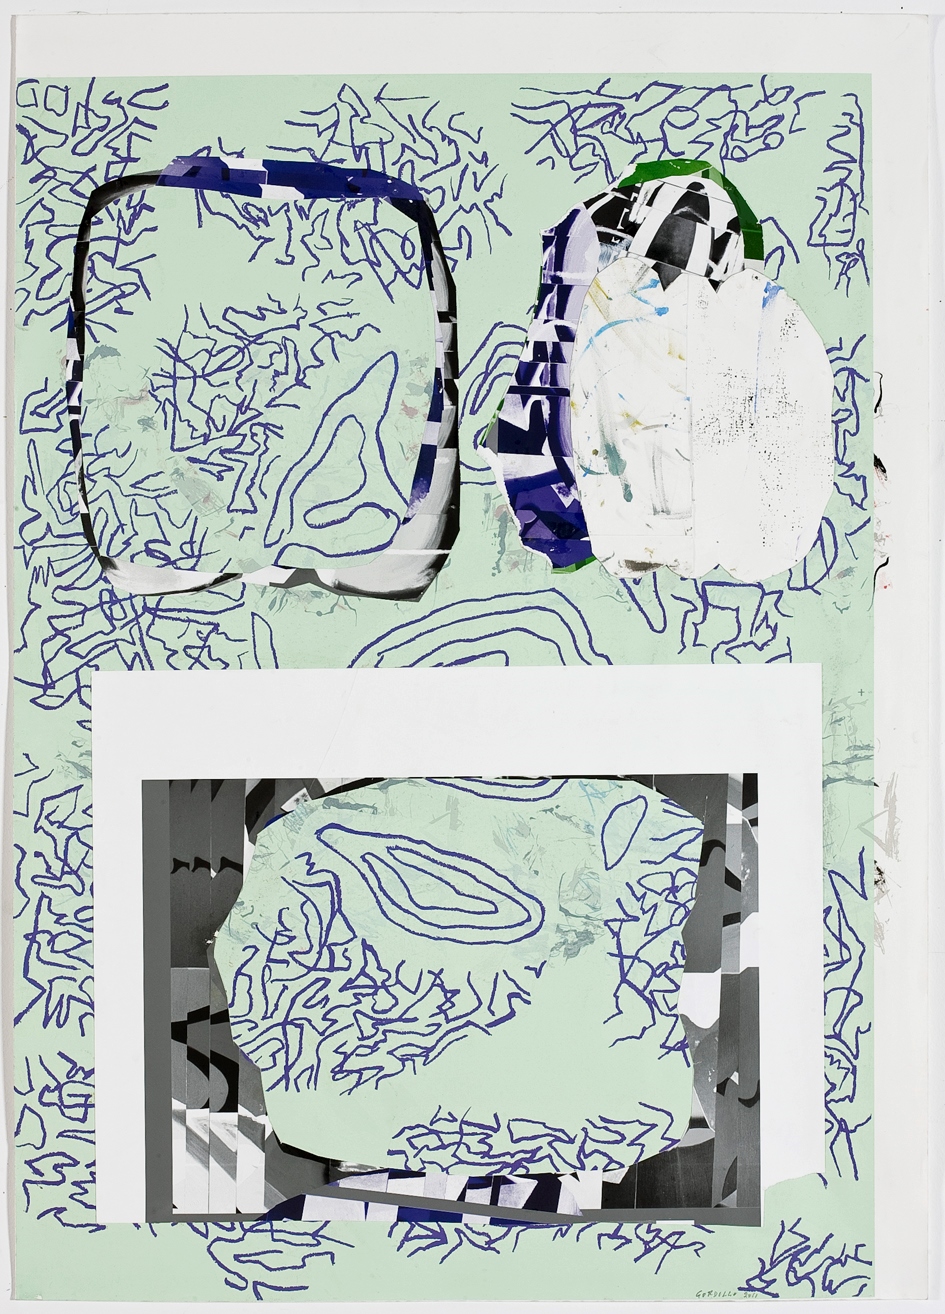 Untitled, 2011, mixed media with digital collages on paper, 105 x 74,5 cm.